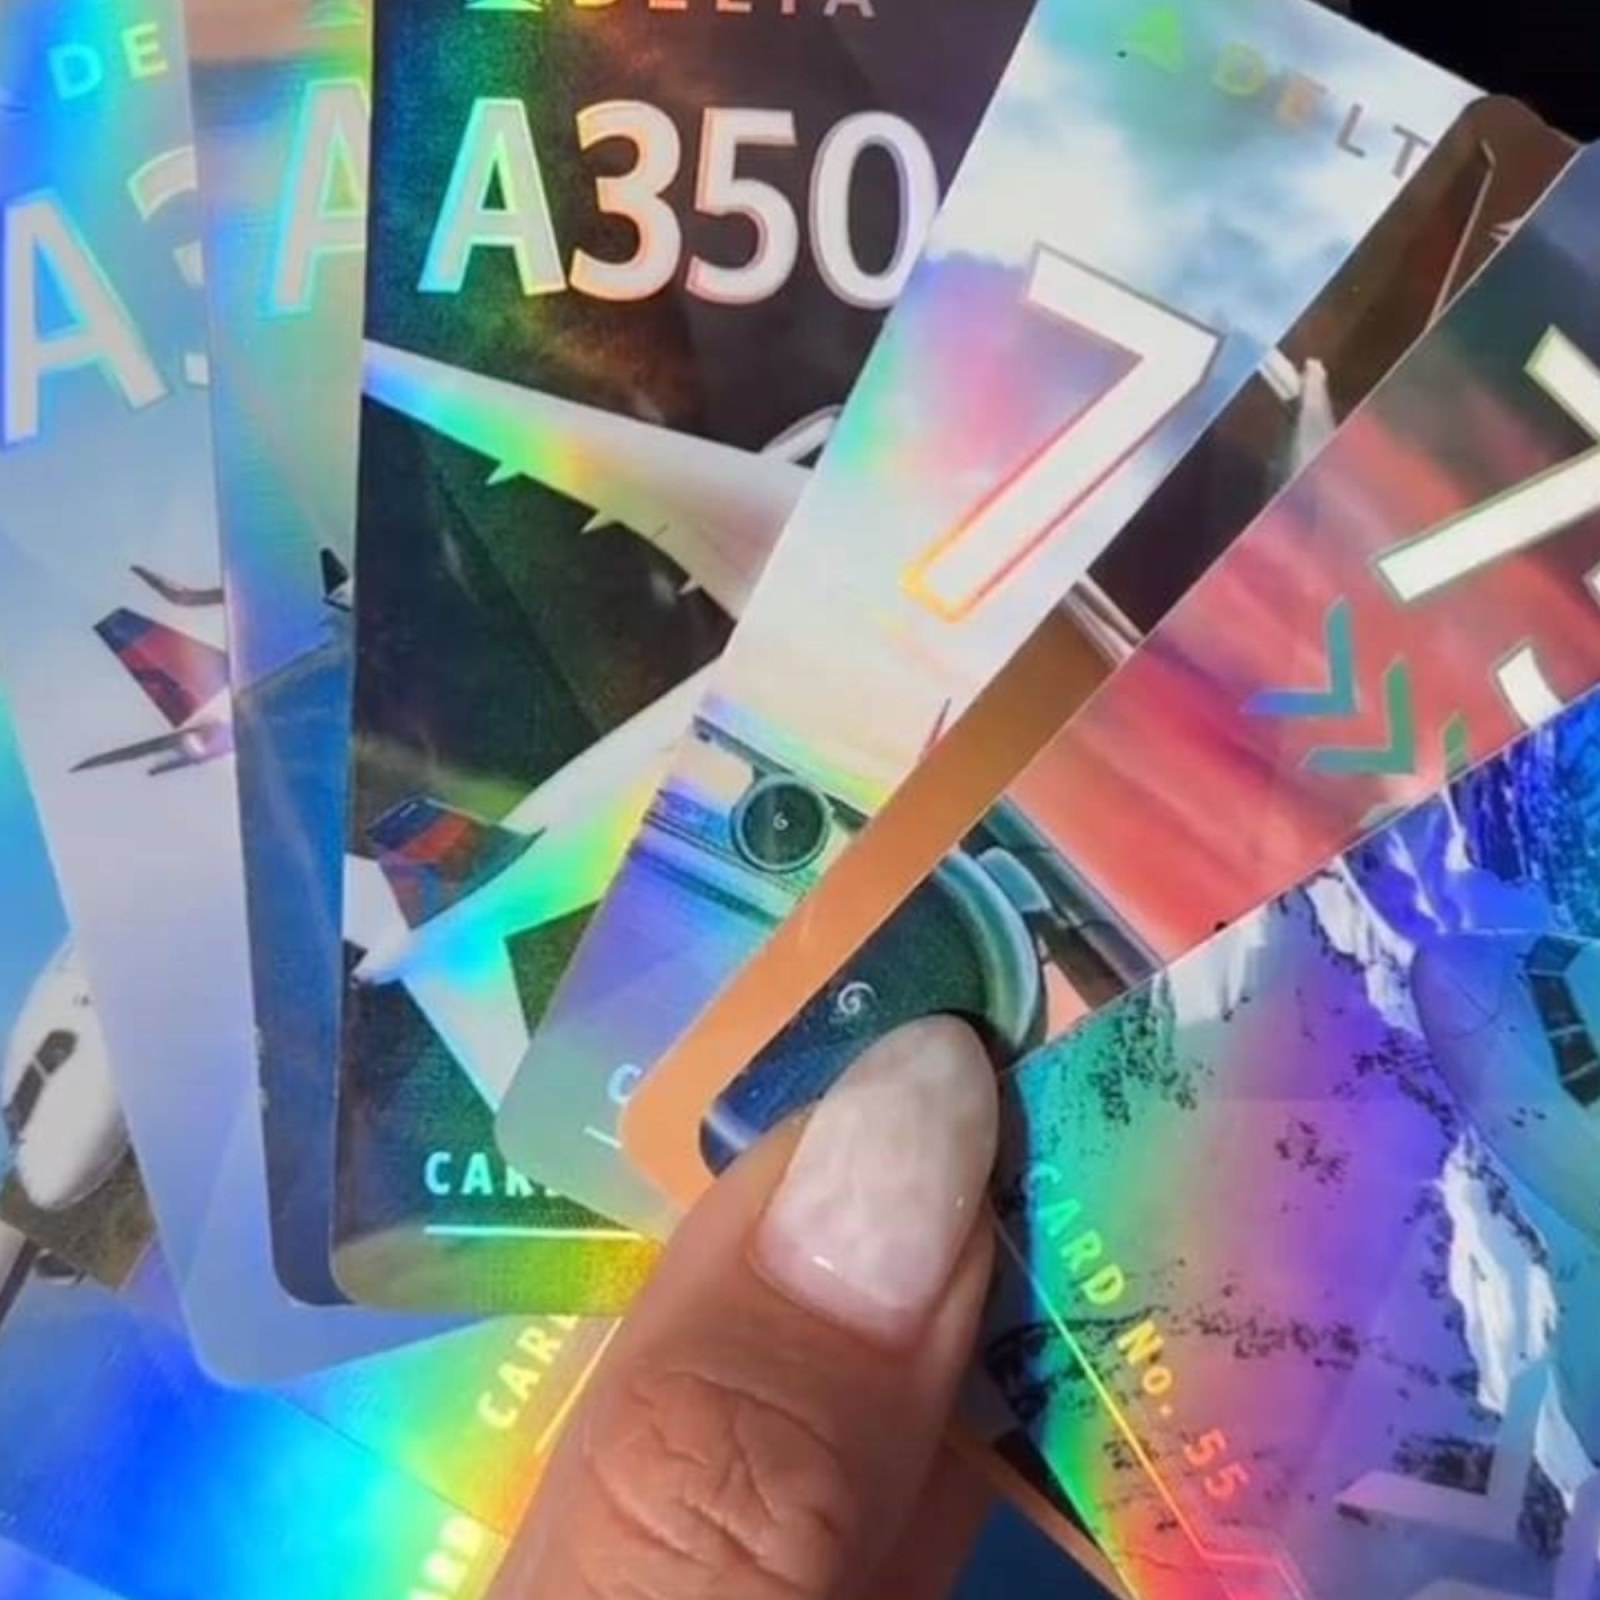 Delta Air Lines Has Secret Trading Cards — Here's How to Score One!